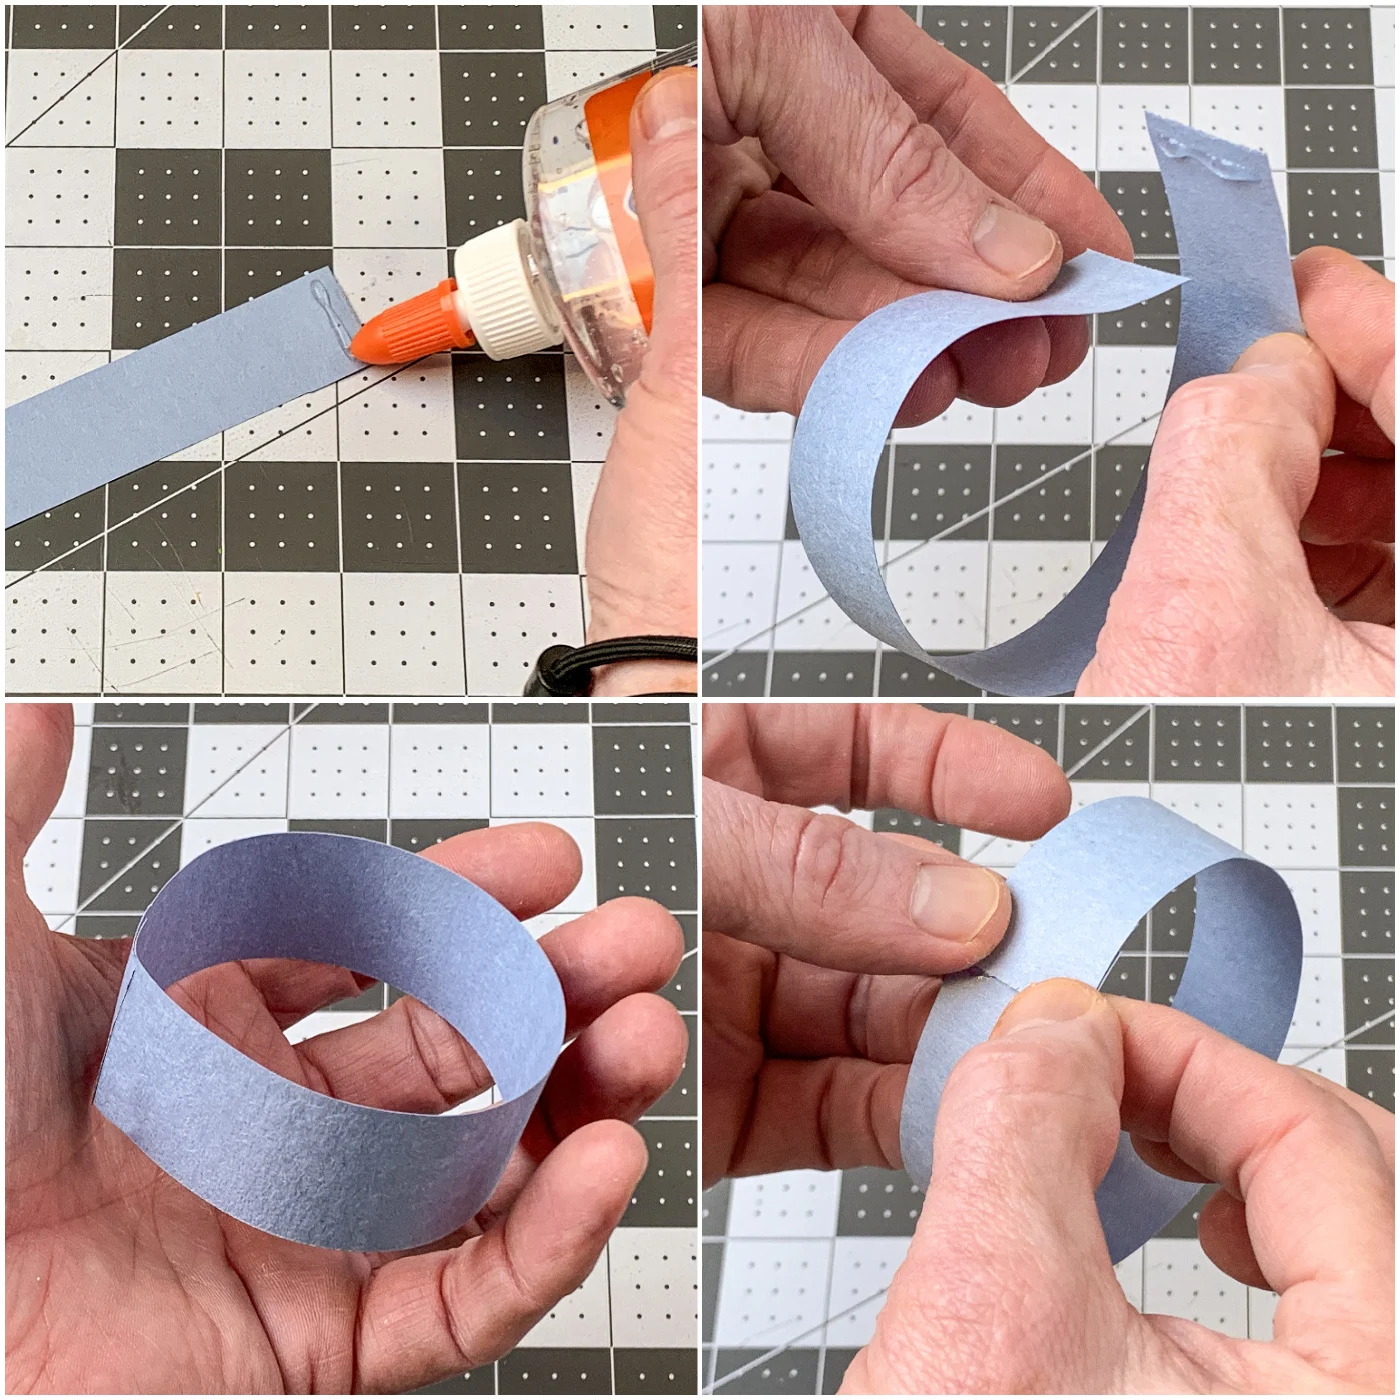 Gluing together the paper ends to make a link